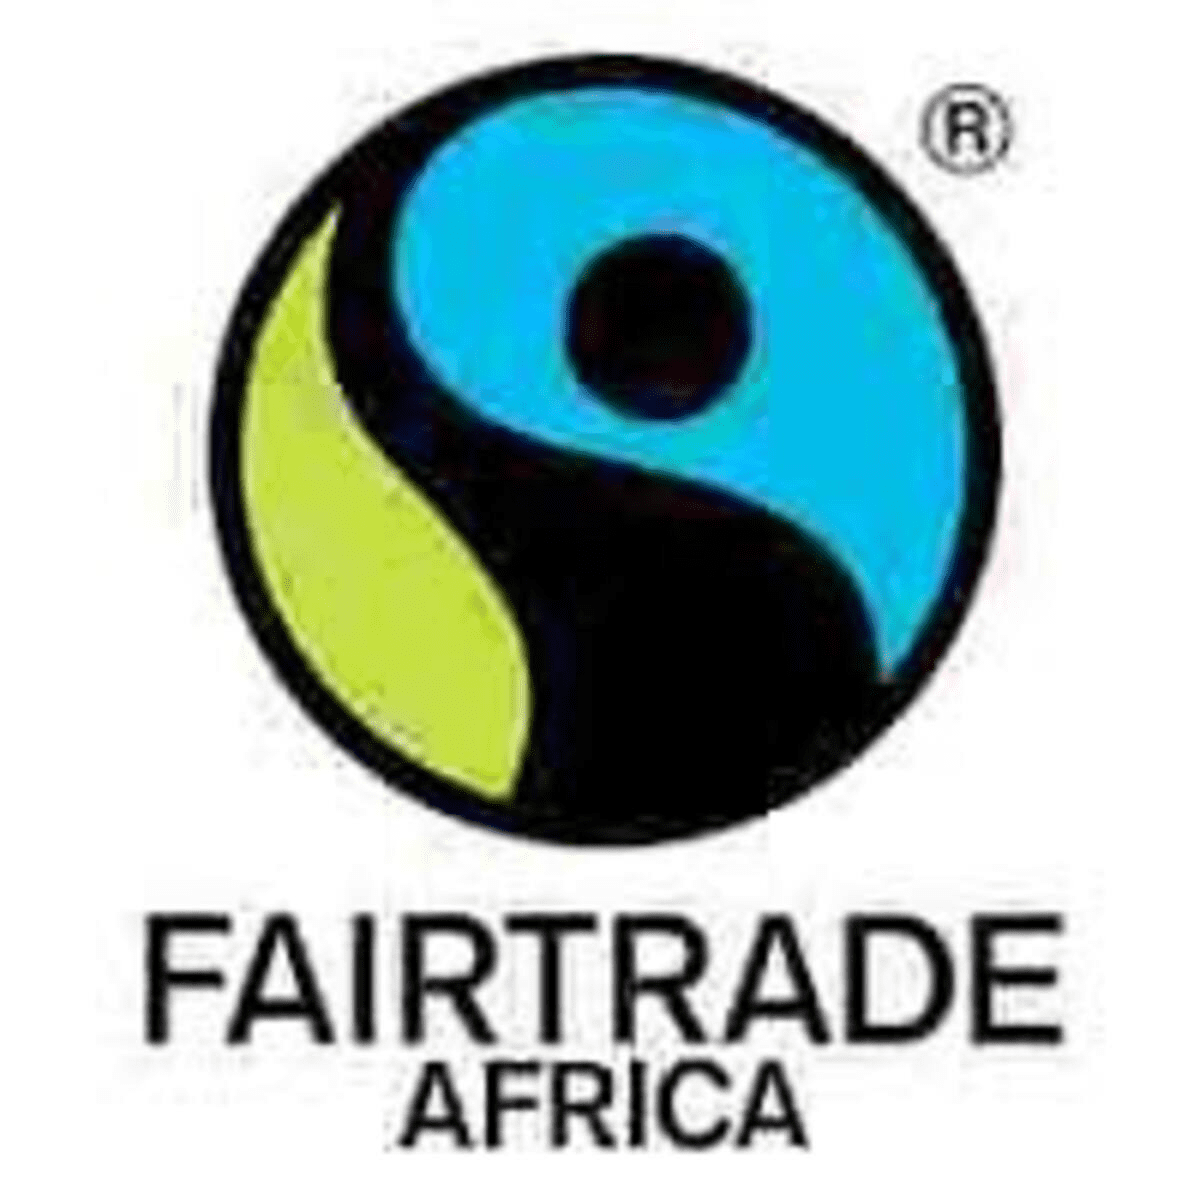 New Job Vacancy at Fairtrade Africa Tanzania 2022, Nafasi za Kazi Fairtrade Africa jobs 2022, Fairtrade jobs, Fair Trade projects in Africa